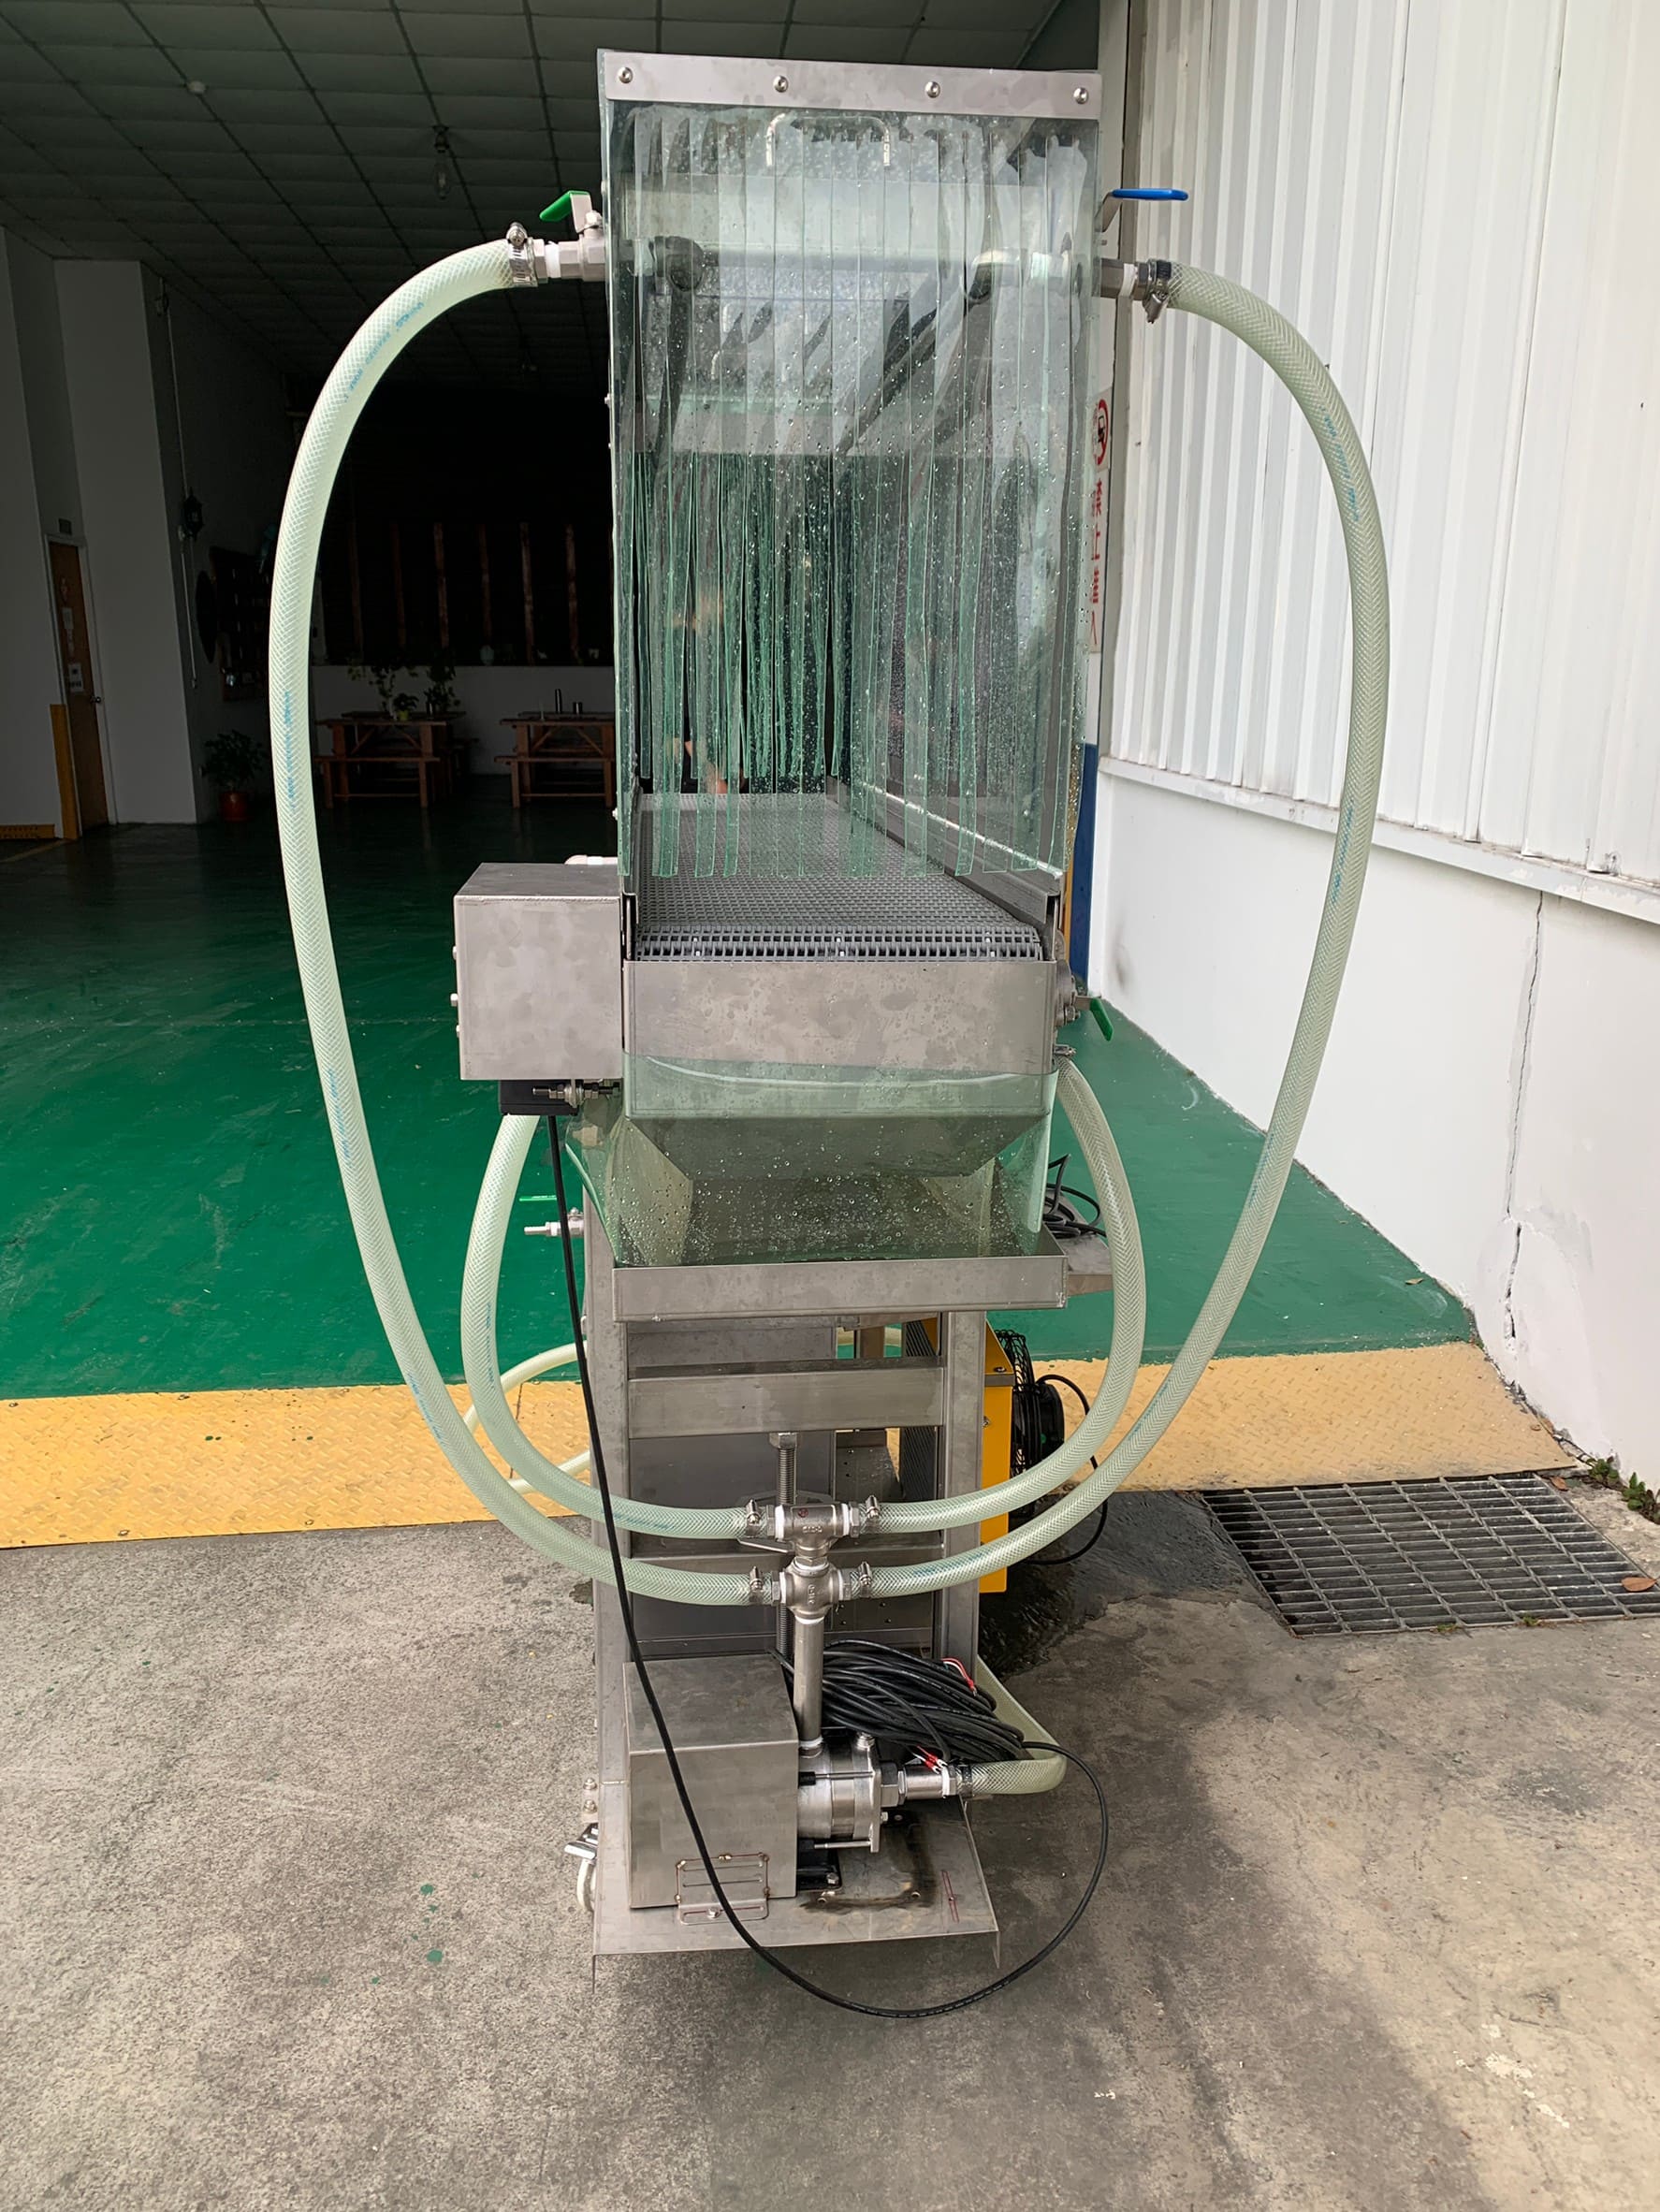 Sprinkler Stainless Steel Conveyor Equipped With Plastic Net-Lichen Conveyor Automatic Equipment Co., Ltd.